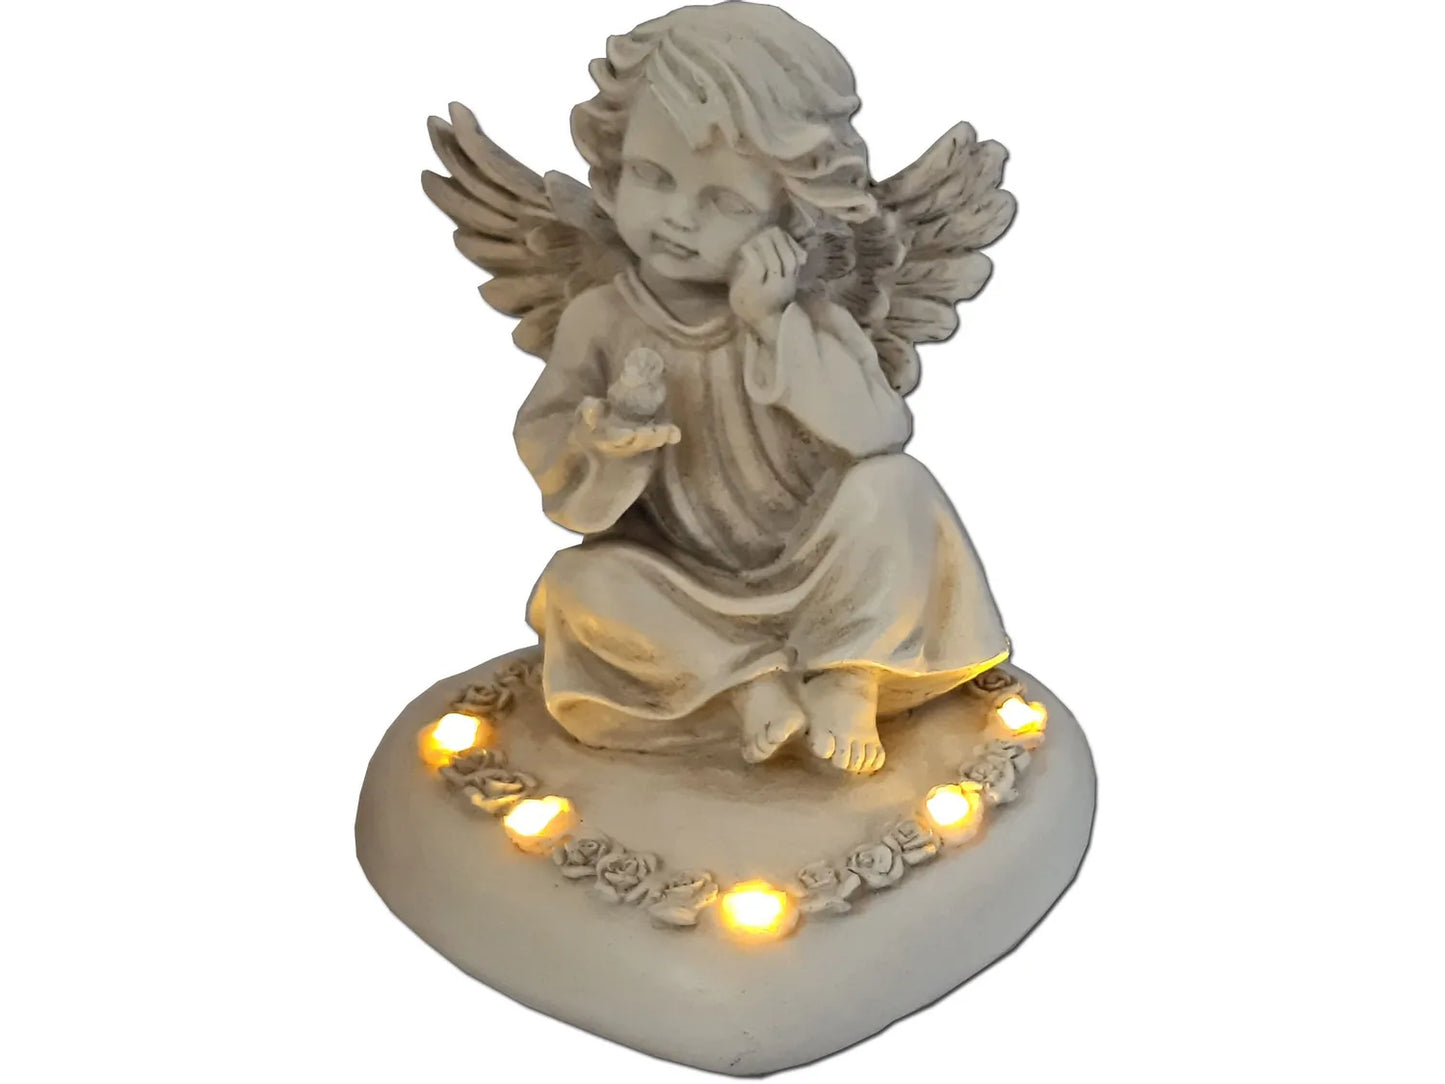 LED angel figurine (Male) - batteries not included